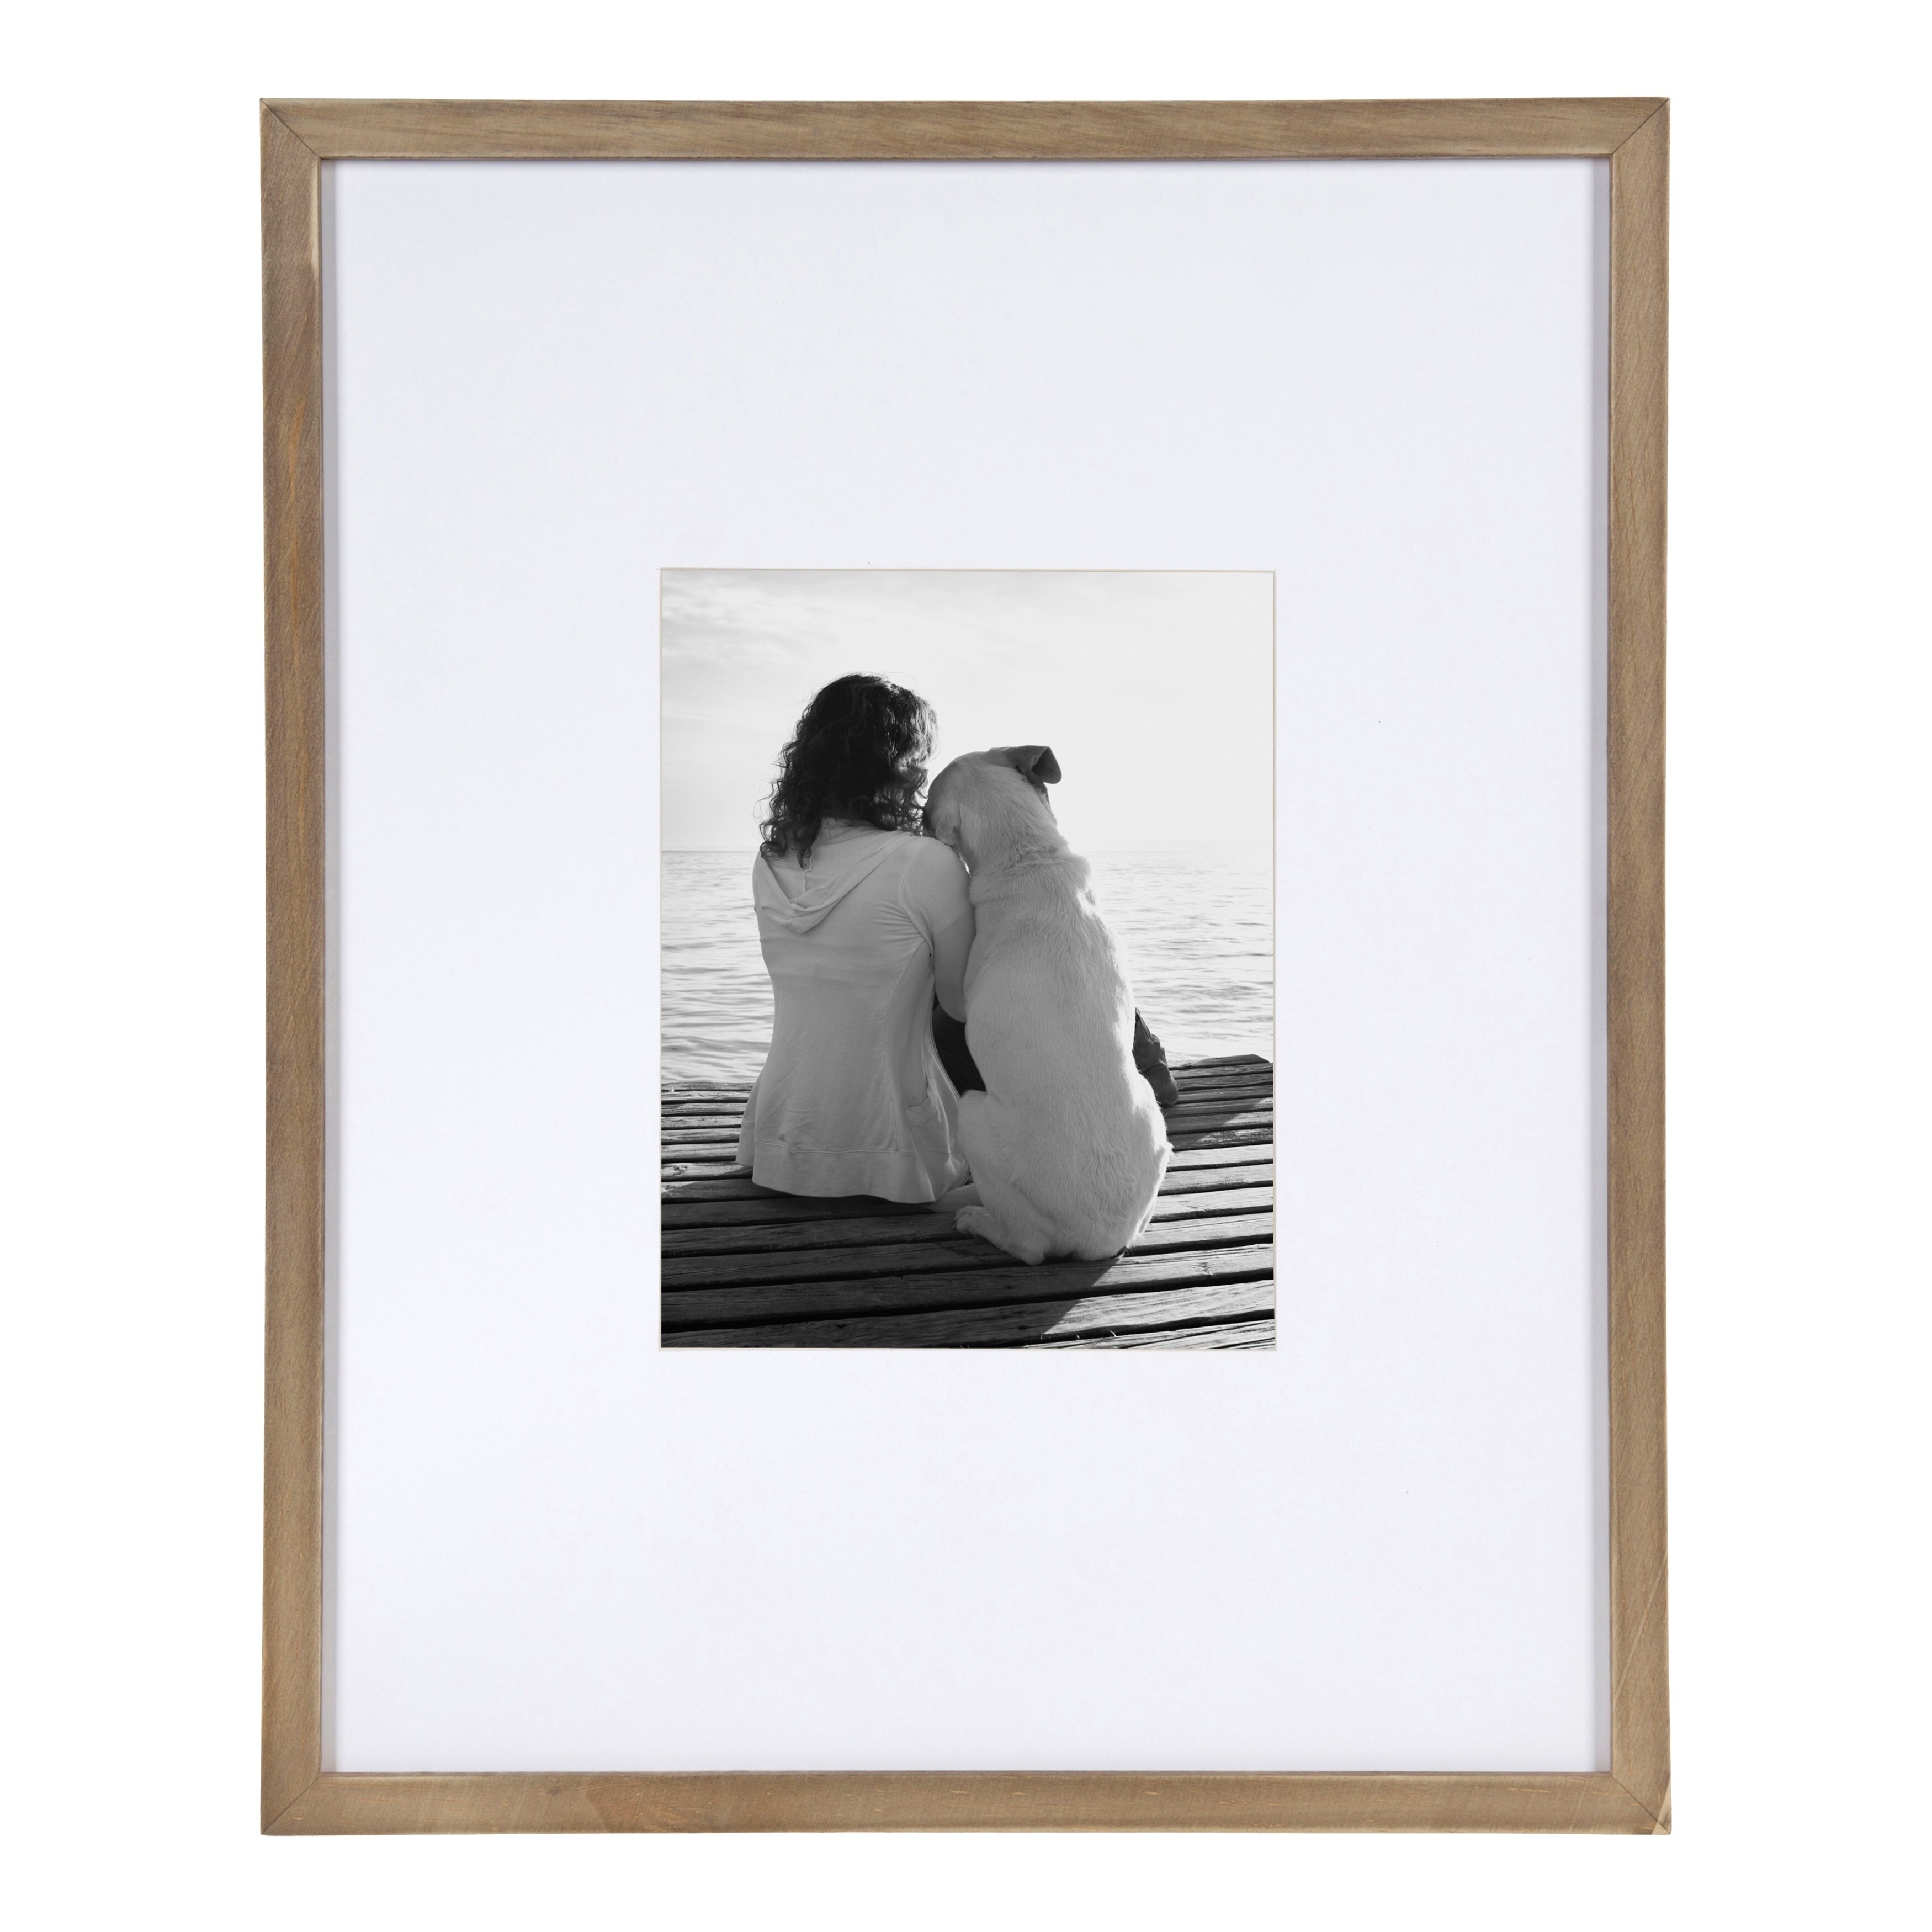 DesignOvation Gallery Wood Wall Picture Frame Walnut Brown (Set of 2) - 16x20  matted to 8x10 - (As Is Item) - Bed Bath & Beyond - 29923753